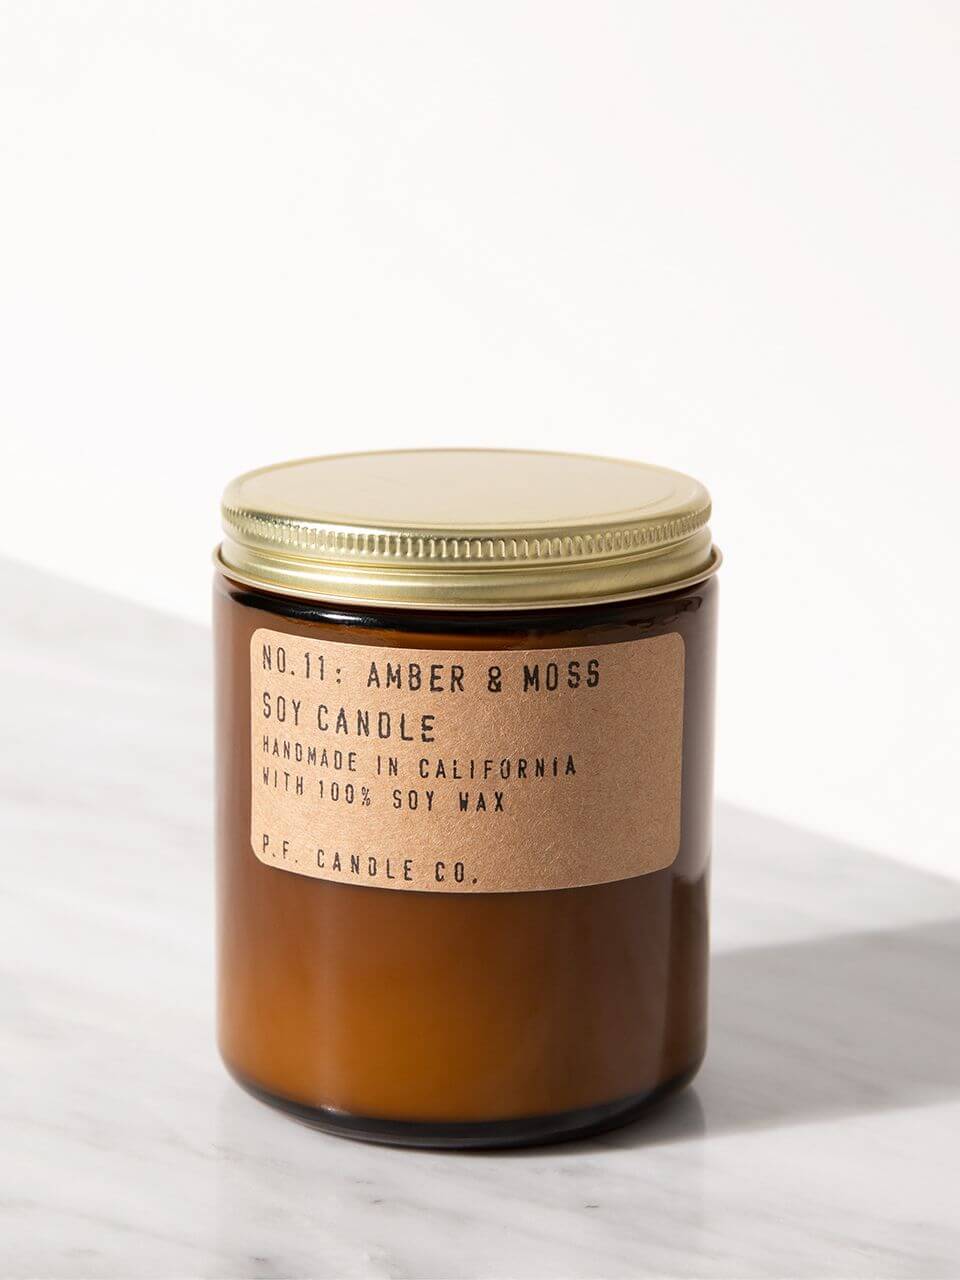 Amber and moss soy candle